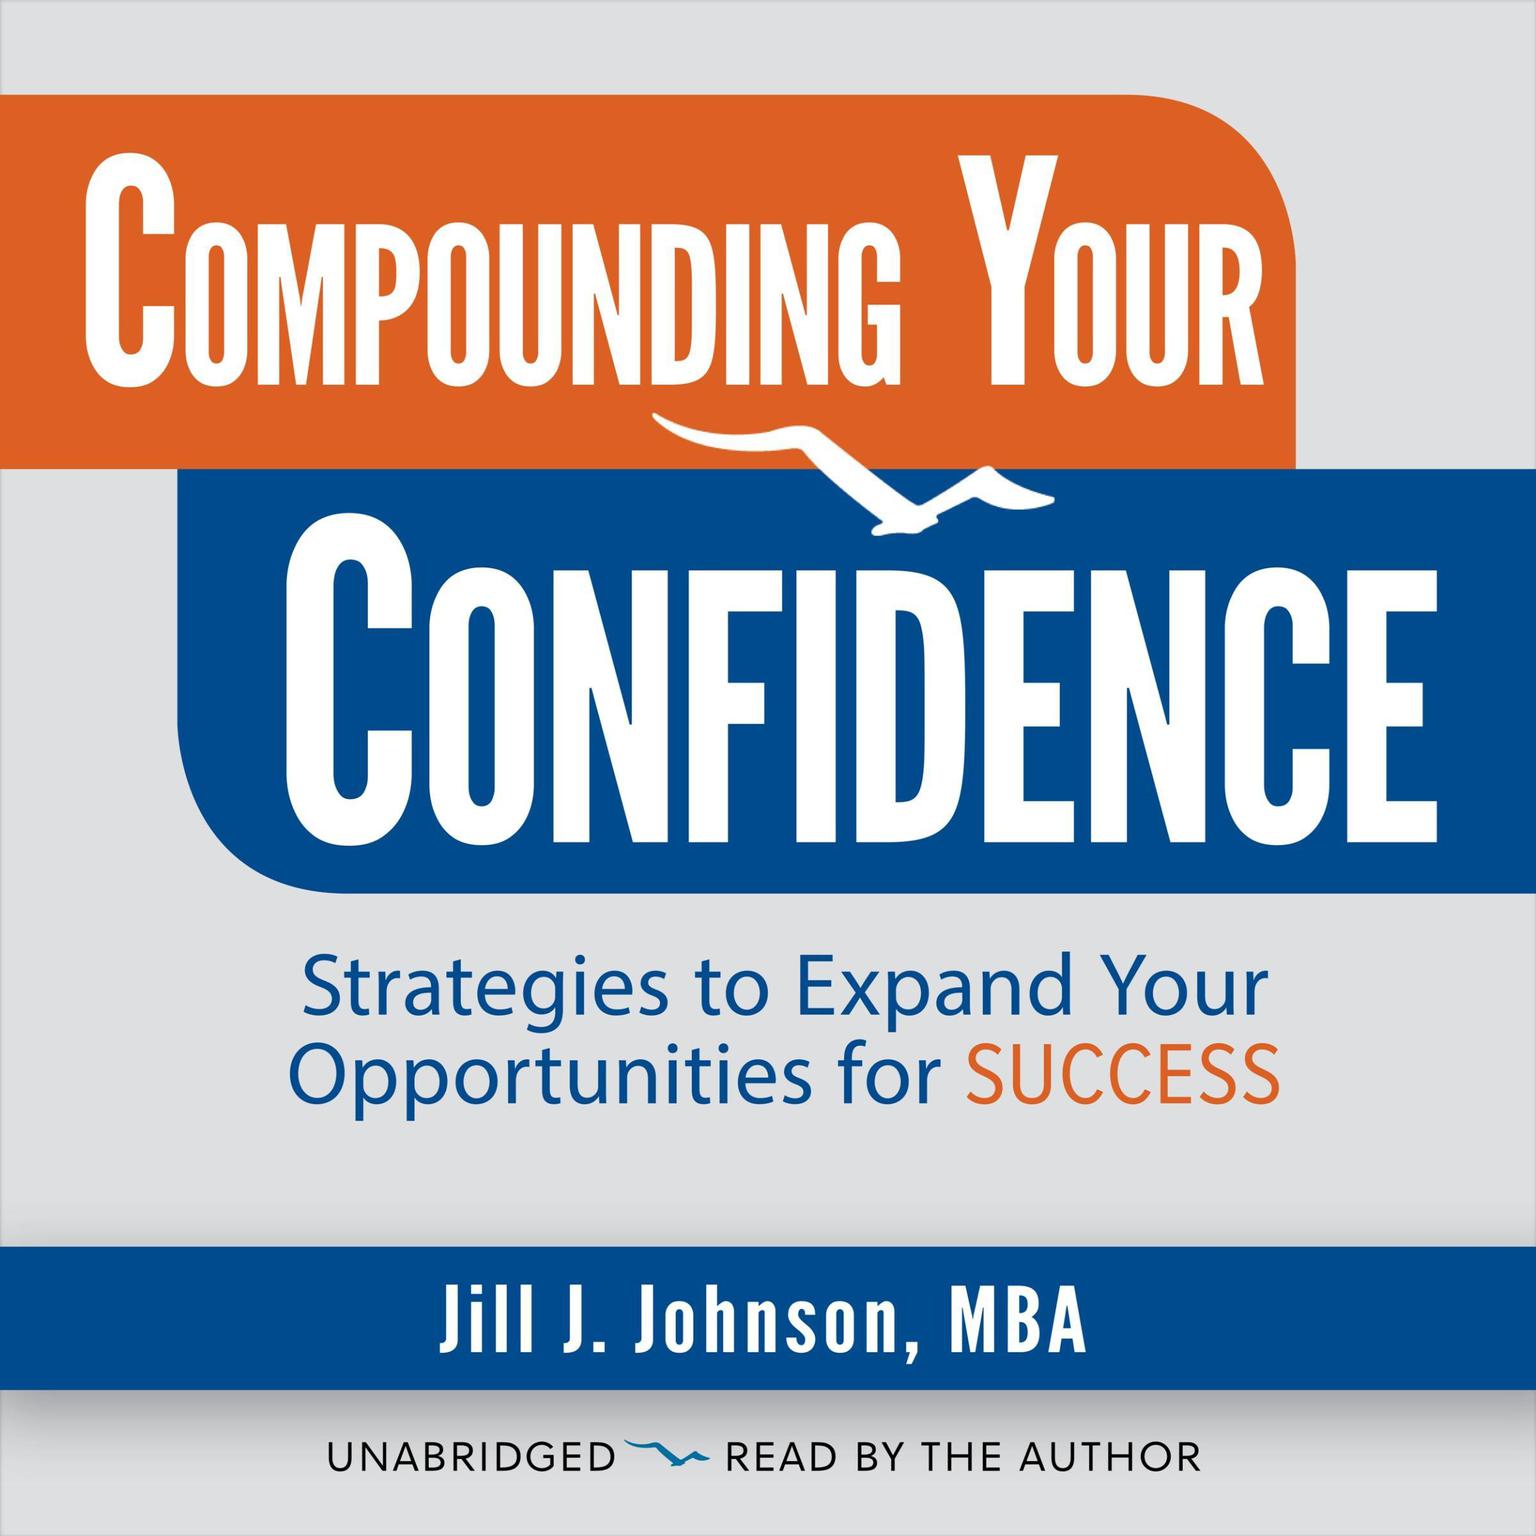 Compounding Your Confidence: Strategies to Expand Your Opportunities for Success Audiobook, by Jill J. Johnson